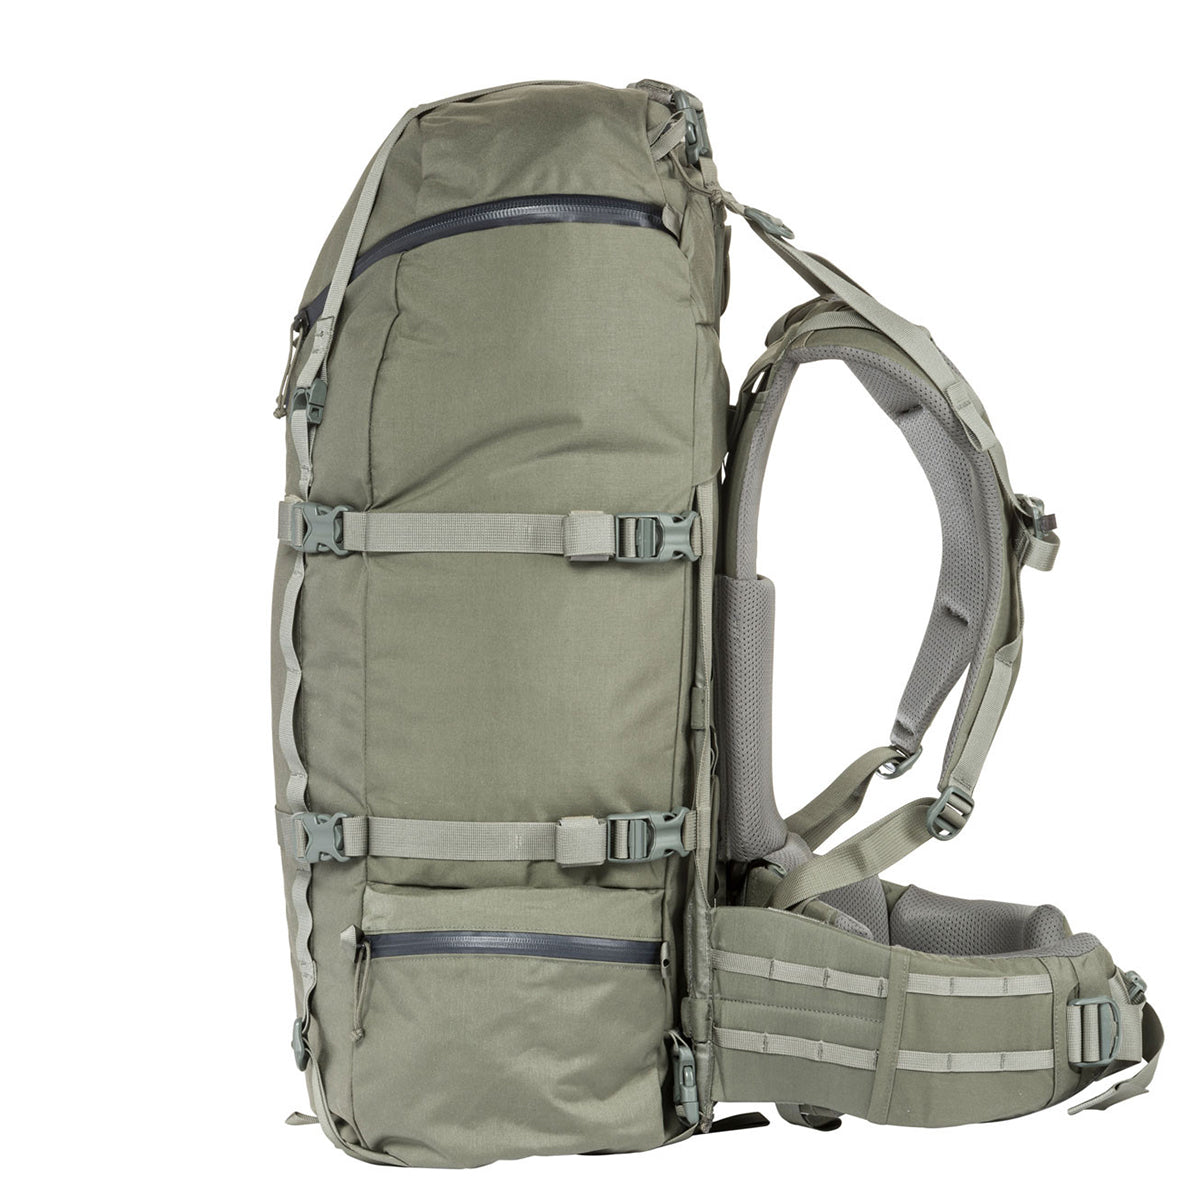 Mystery Ranch Selway 60 Backpack in Mystery Ranch Selway 60 Backpack (2020) by Mystery Ranch | Gear - goHUNT Shop by GOHUNT | Mystery Ranch - GOHUNT Shop